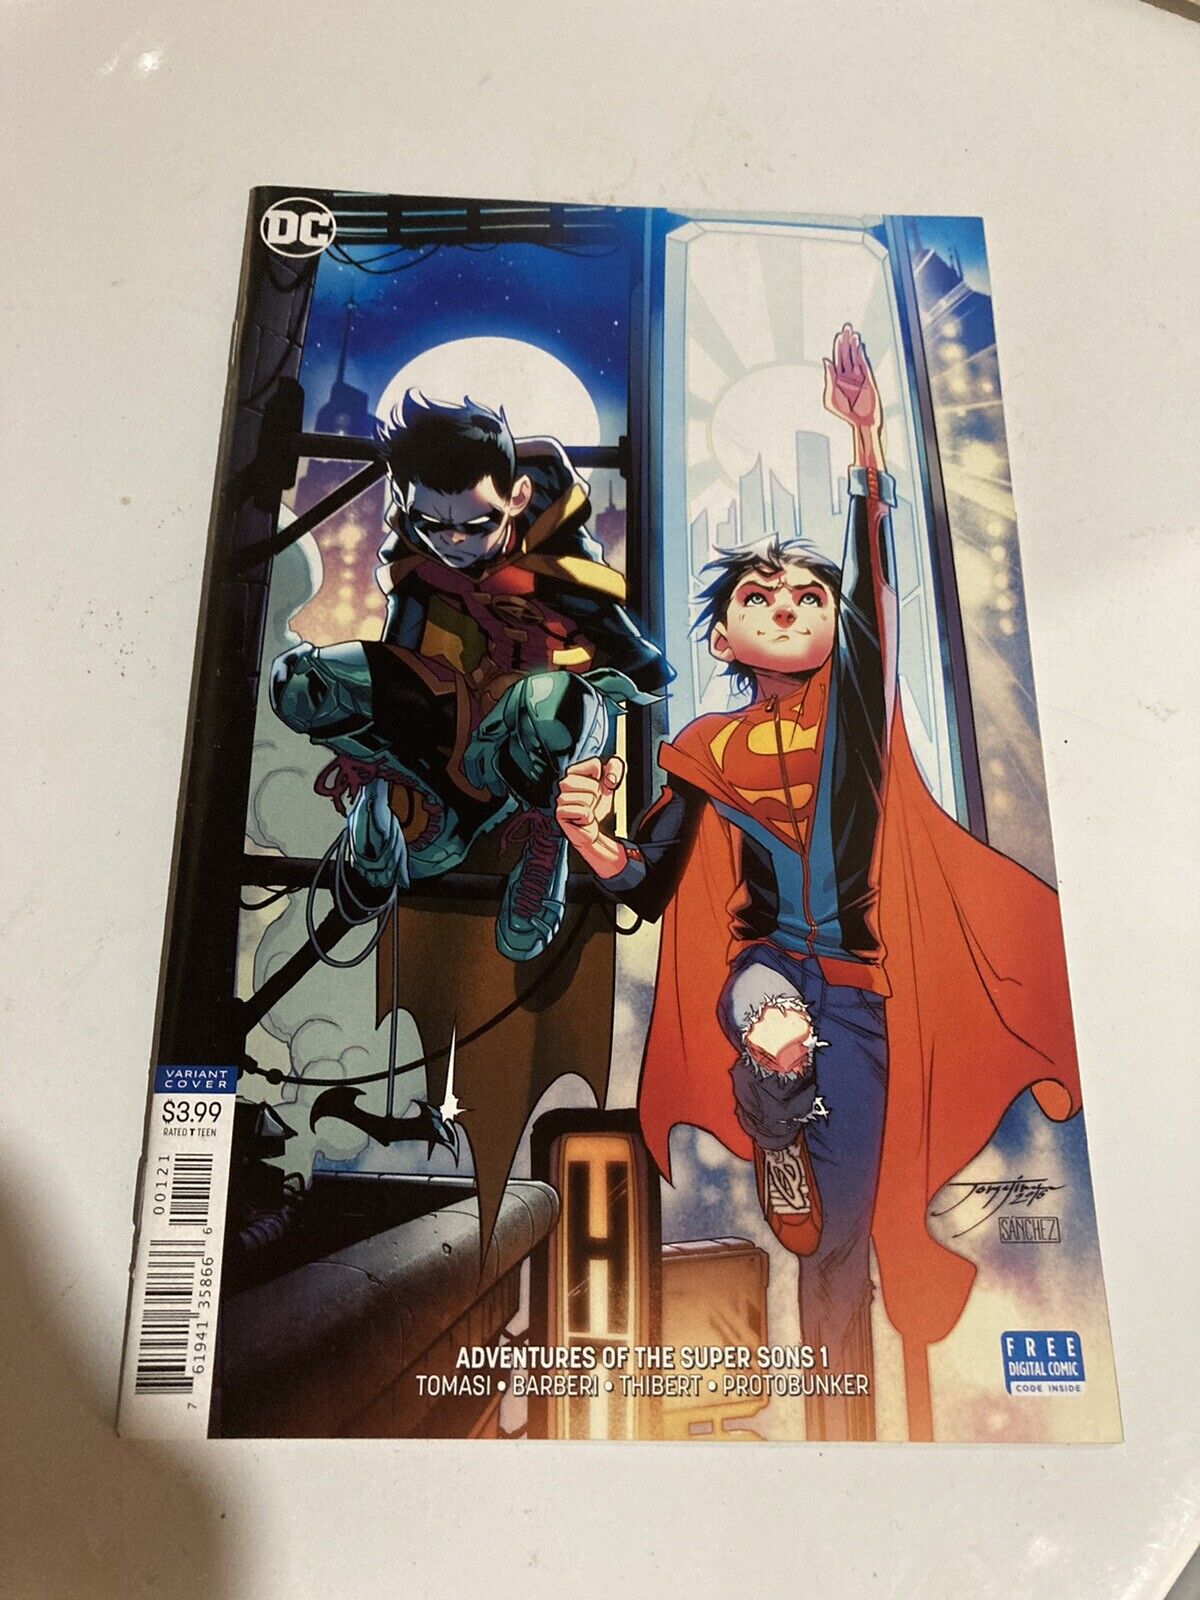 ADVENTURES OF THE SUPER SONS #1 (variant)